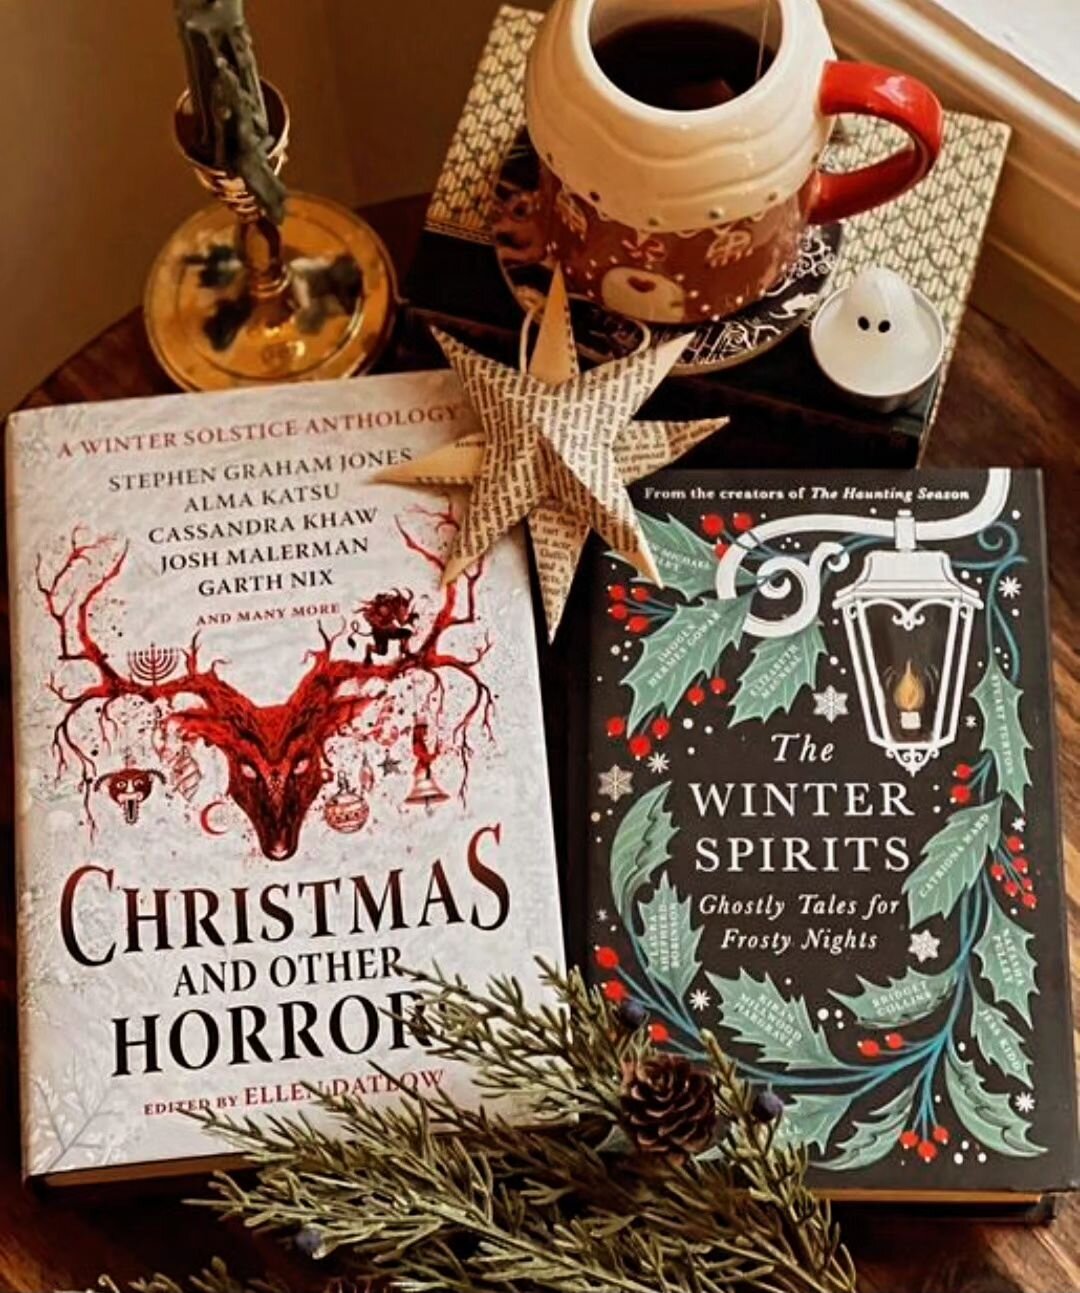 Stay in the Spookmas Spirit. Here are some festive books to give you chills. 🎅🎃

#hudsonhalloween #visithudsonny #halloween365 #spookmas